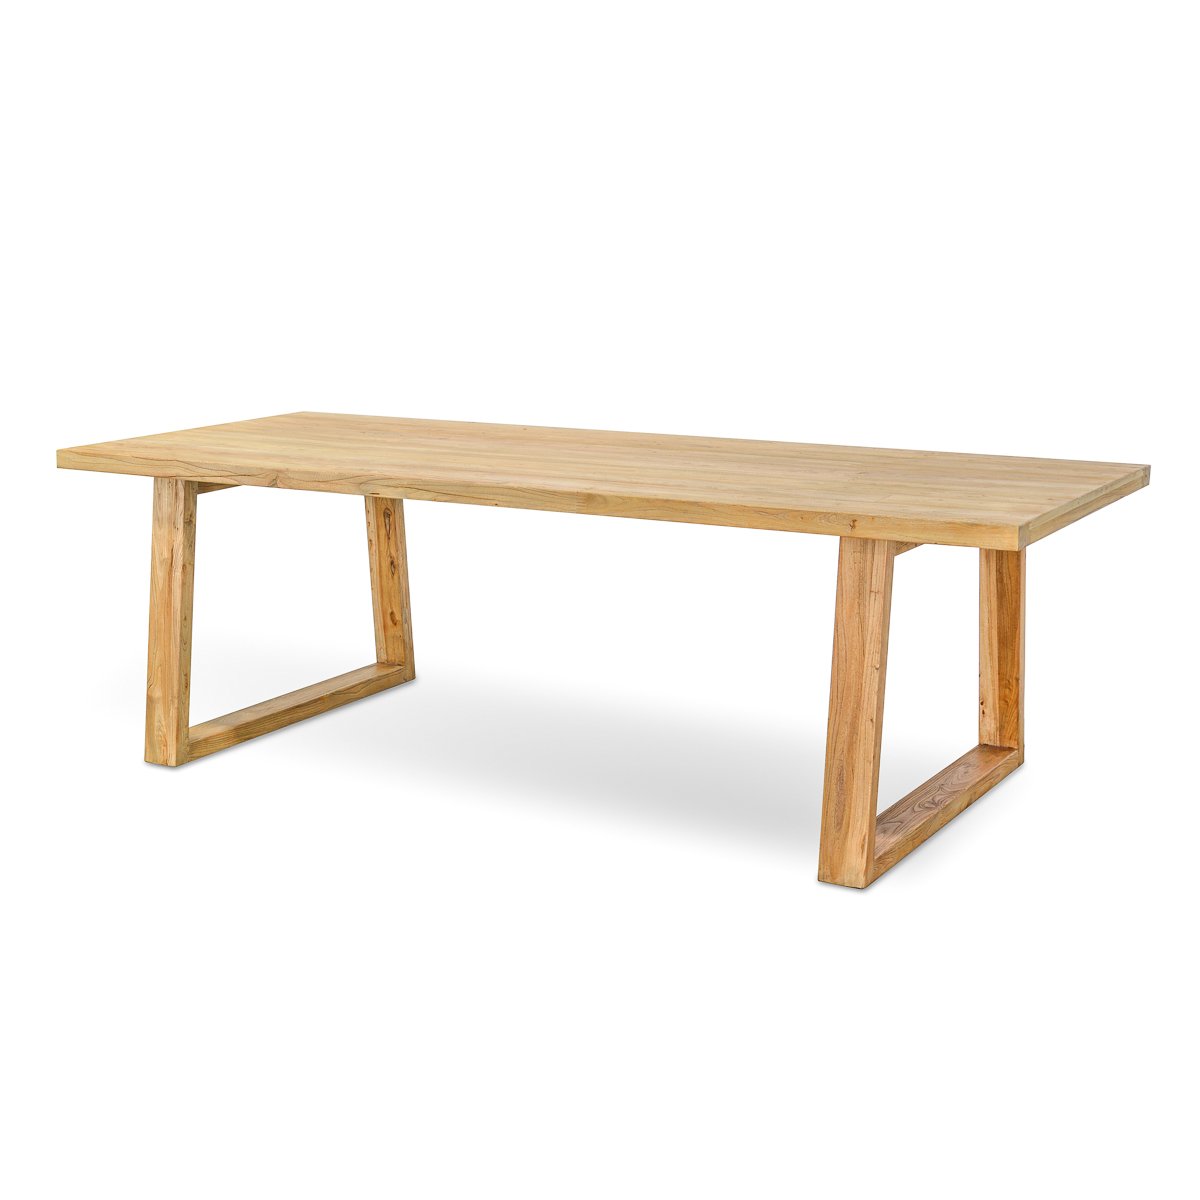 Unni Reclaimed Dining Table - 2.4m